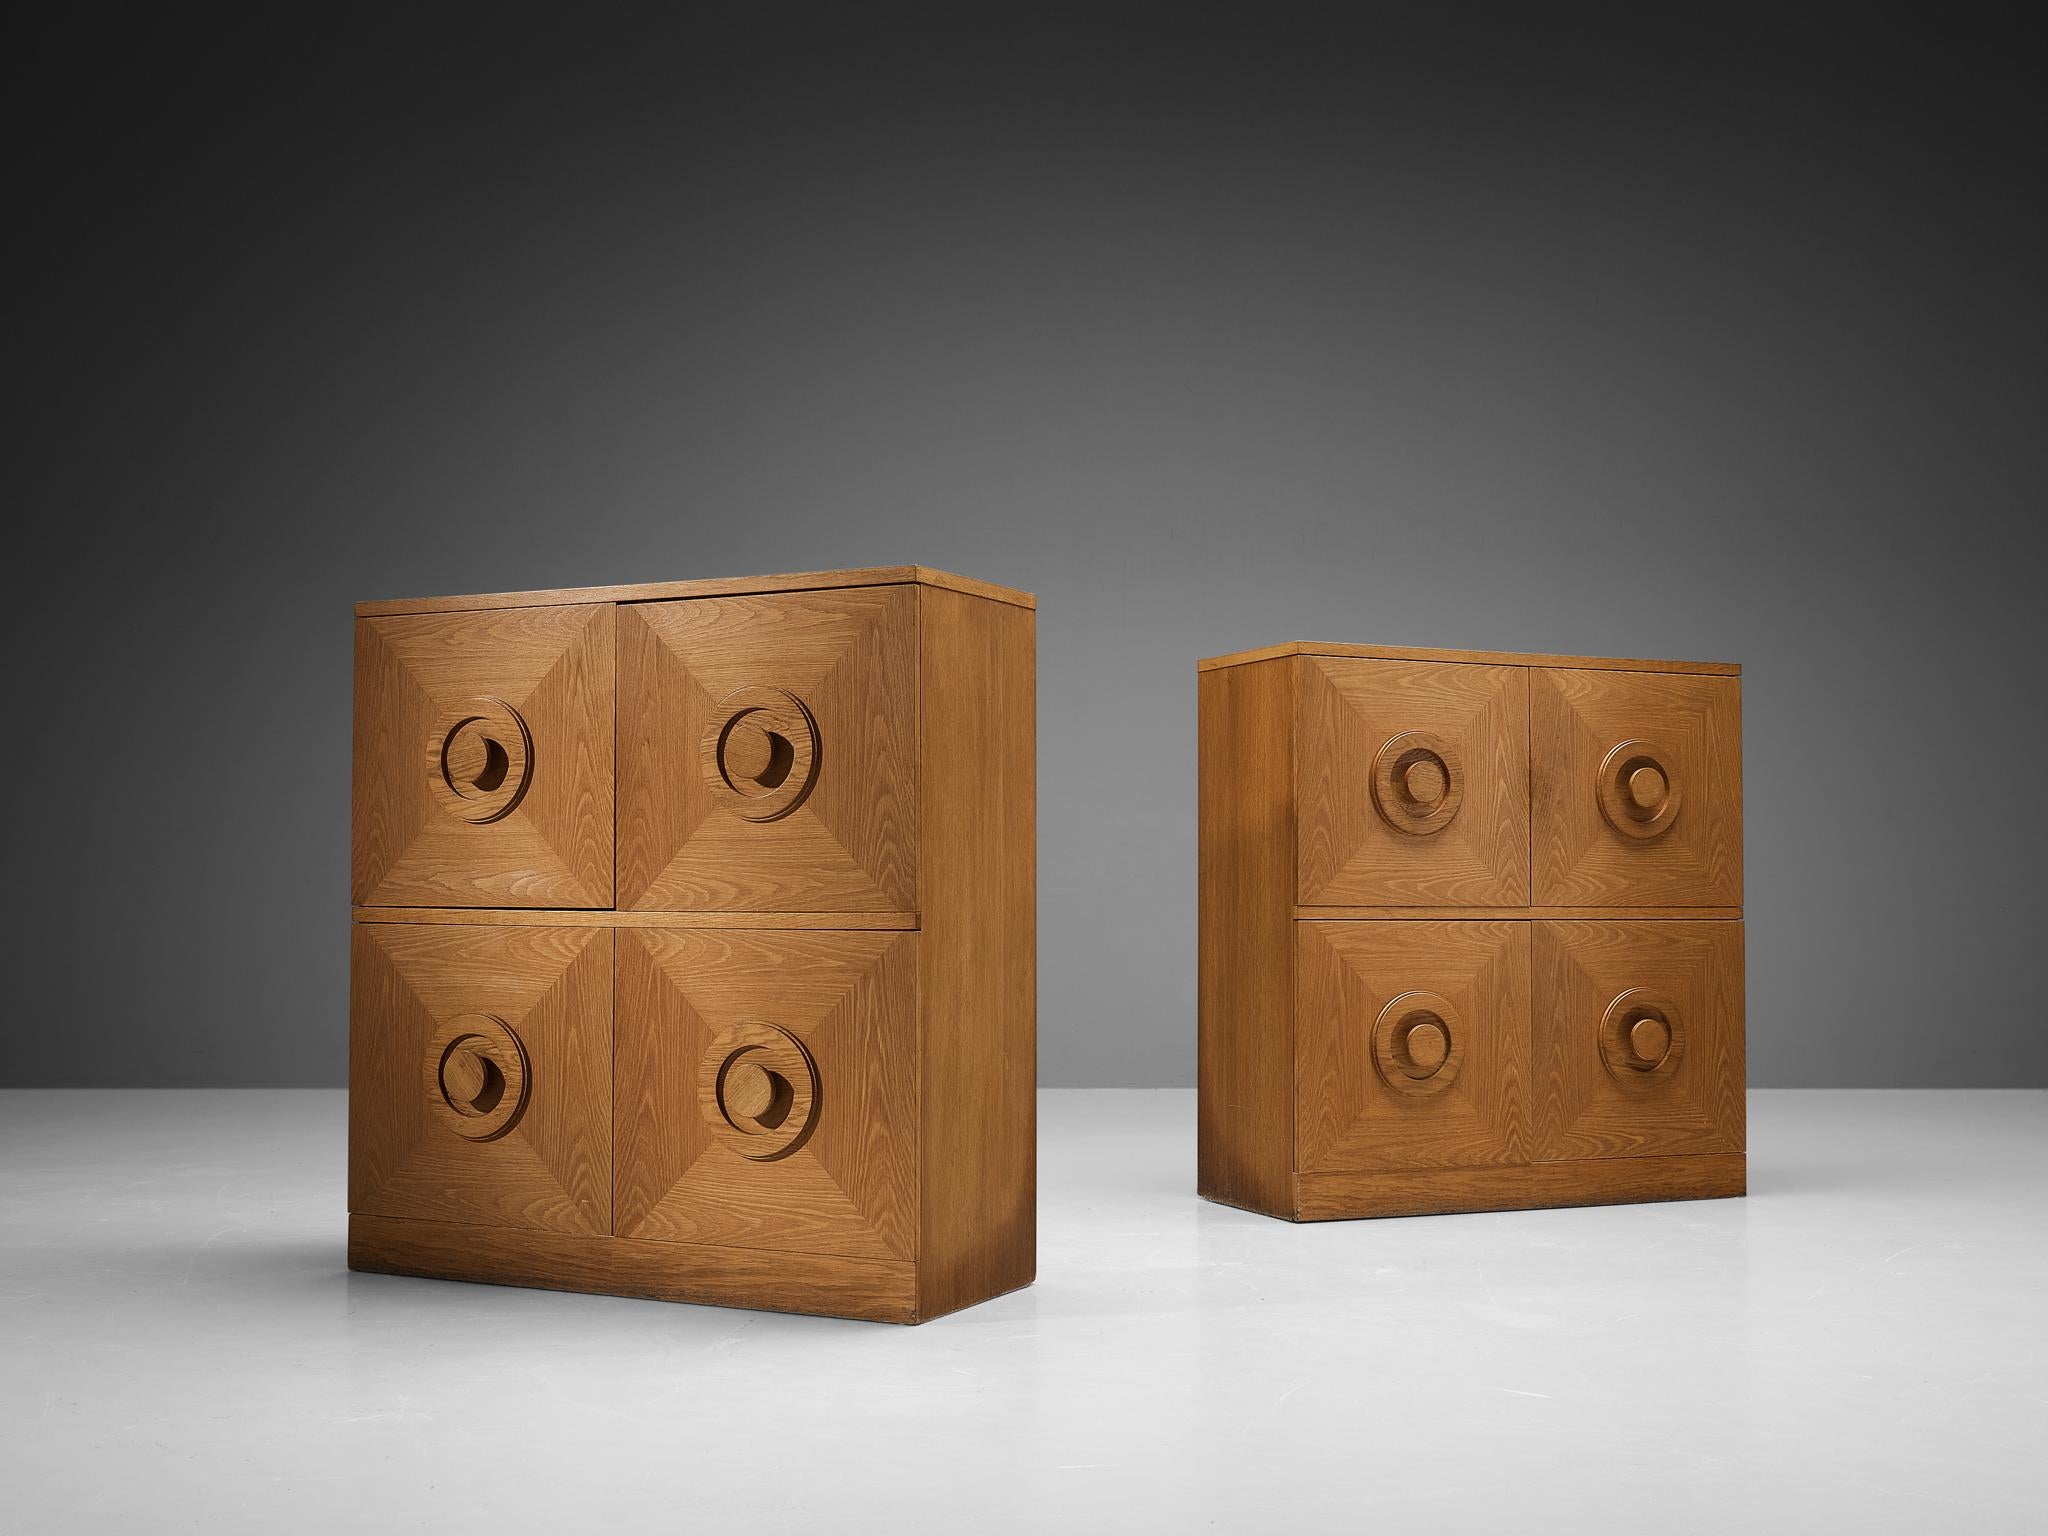 Pair of highboards, stained oak, Belgium, 1970s. 

This very evocative cupboard features a clear rhythm and flow established by means of well thought through lay out that is utterly well-balanced. The round doorknobs immediately catches the eye